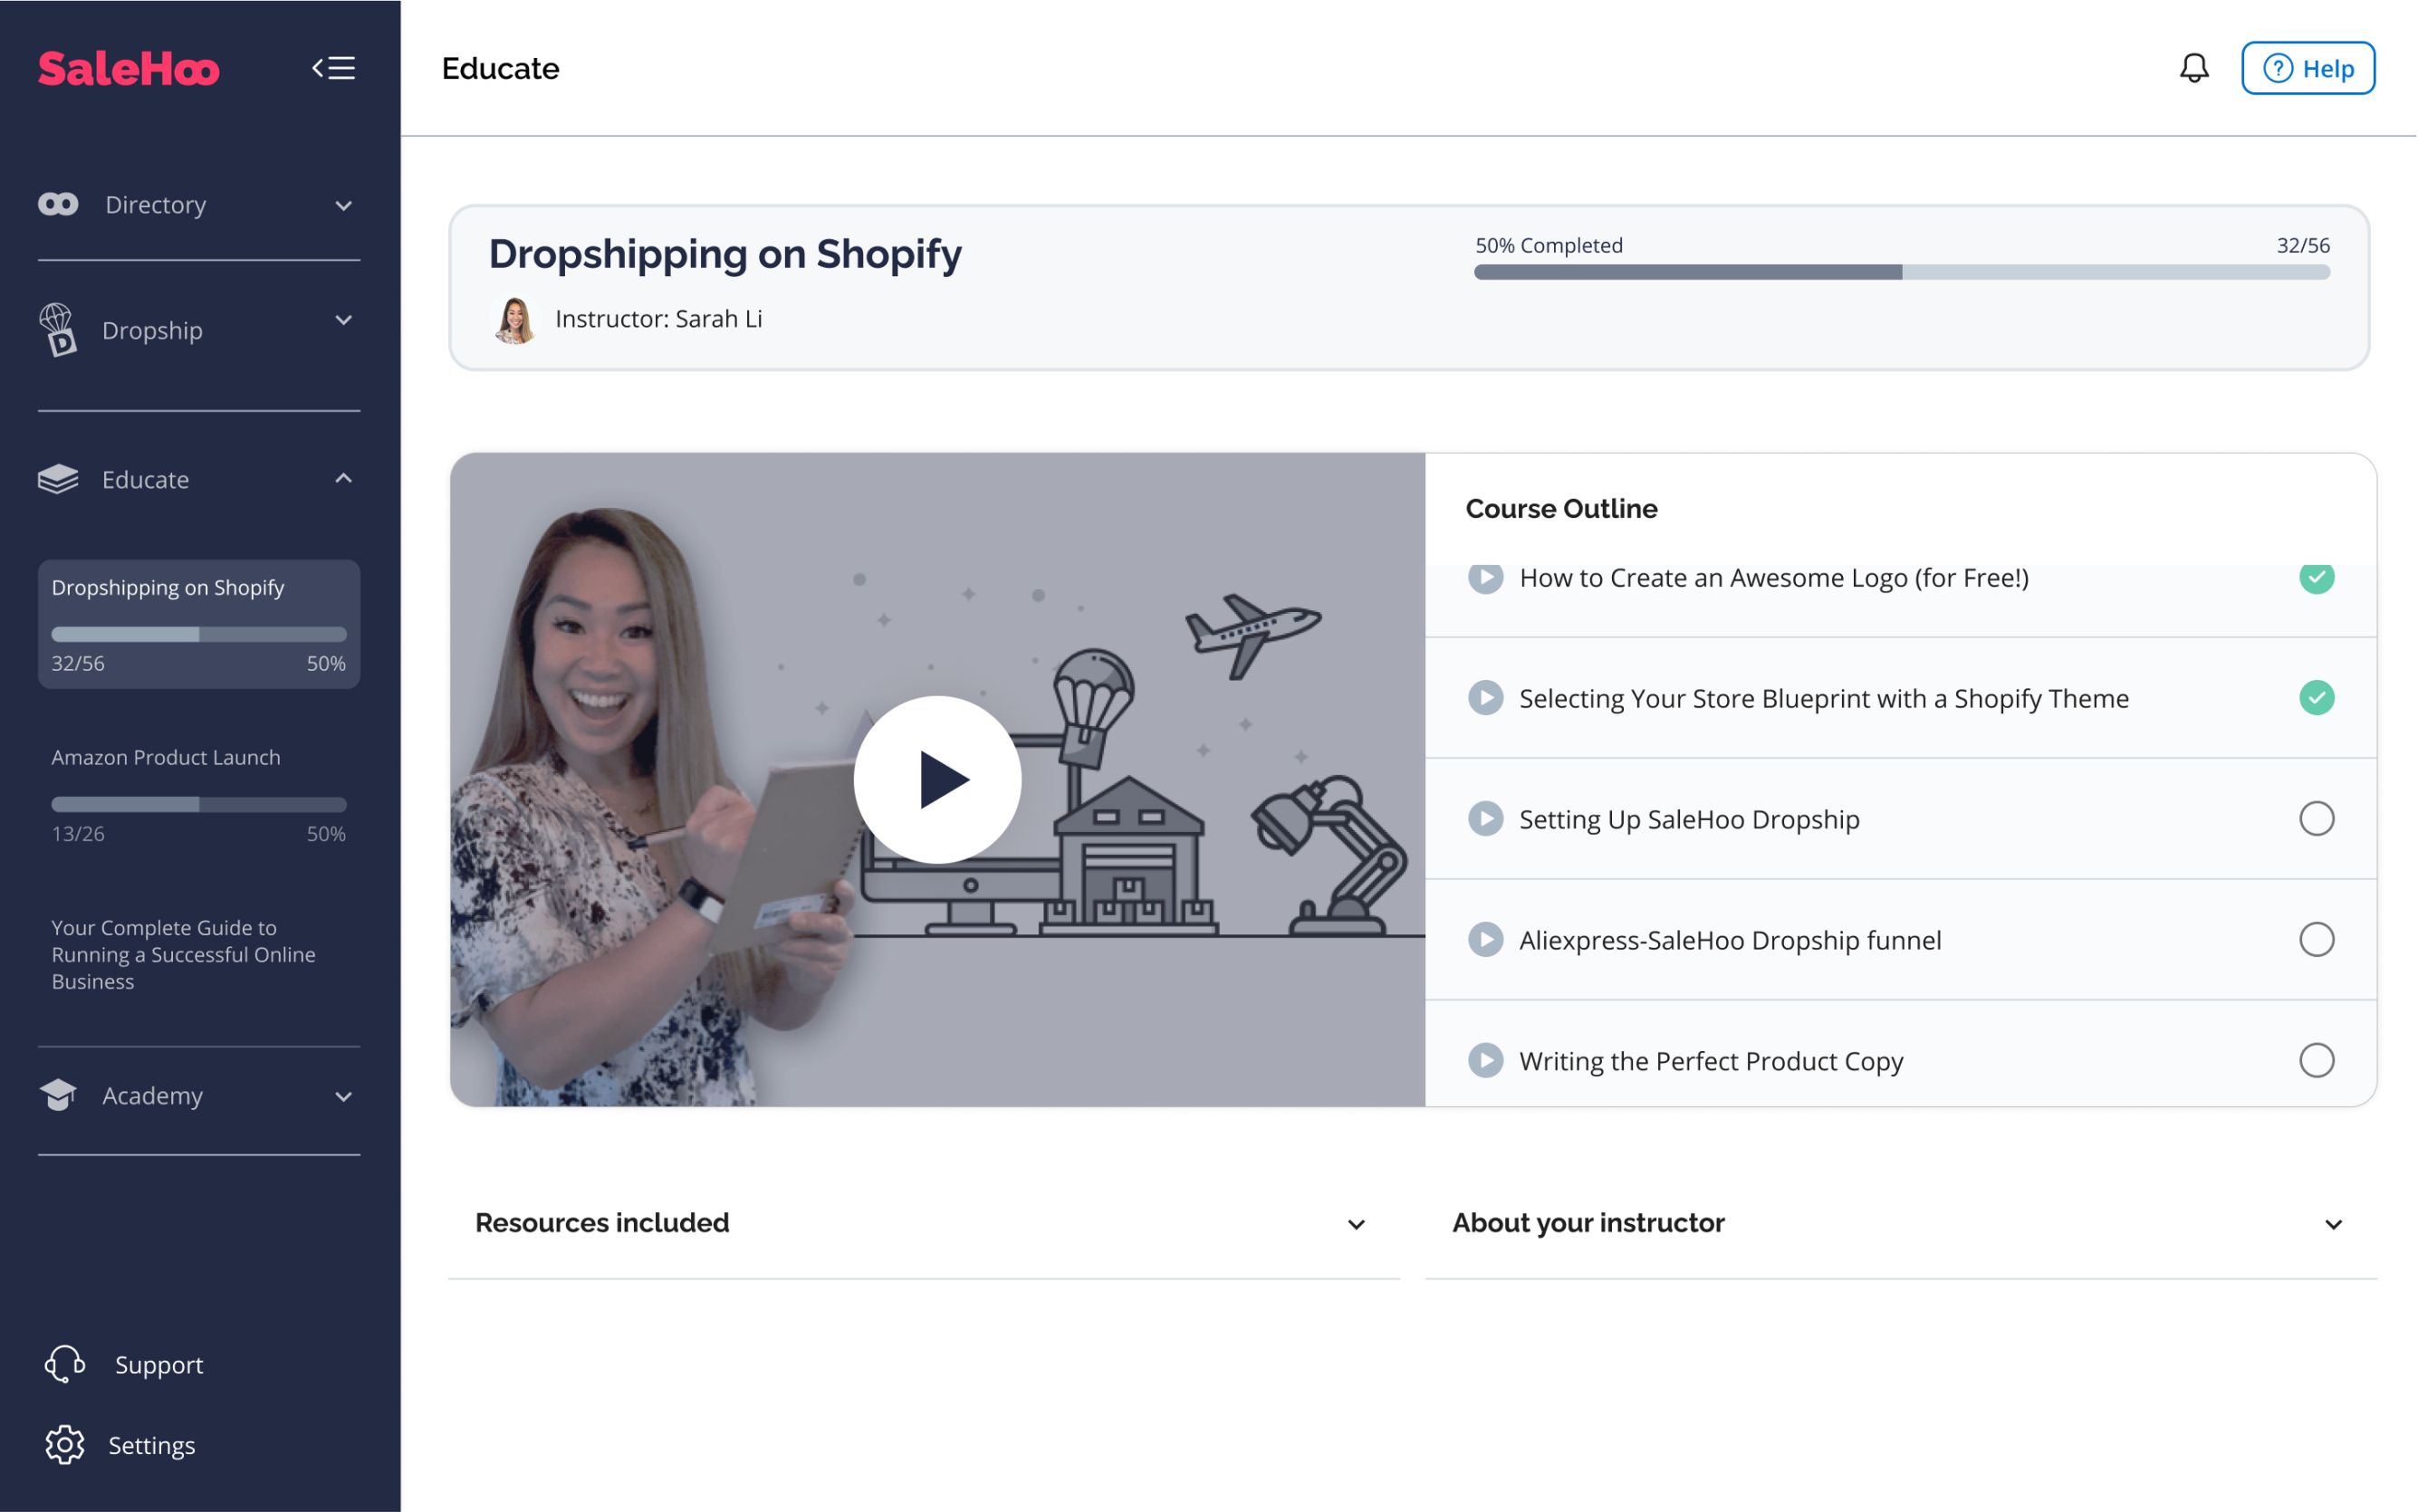 SaleHoo Educate - Dropshipping on Shopify course